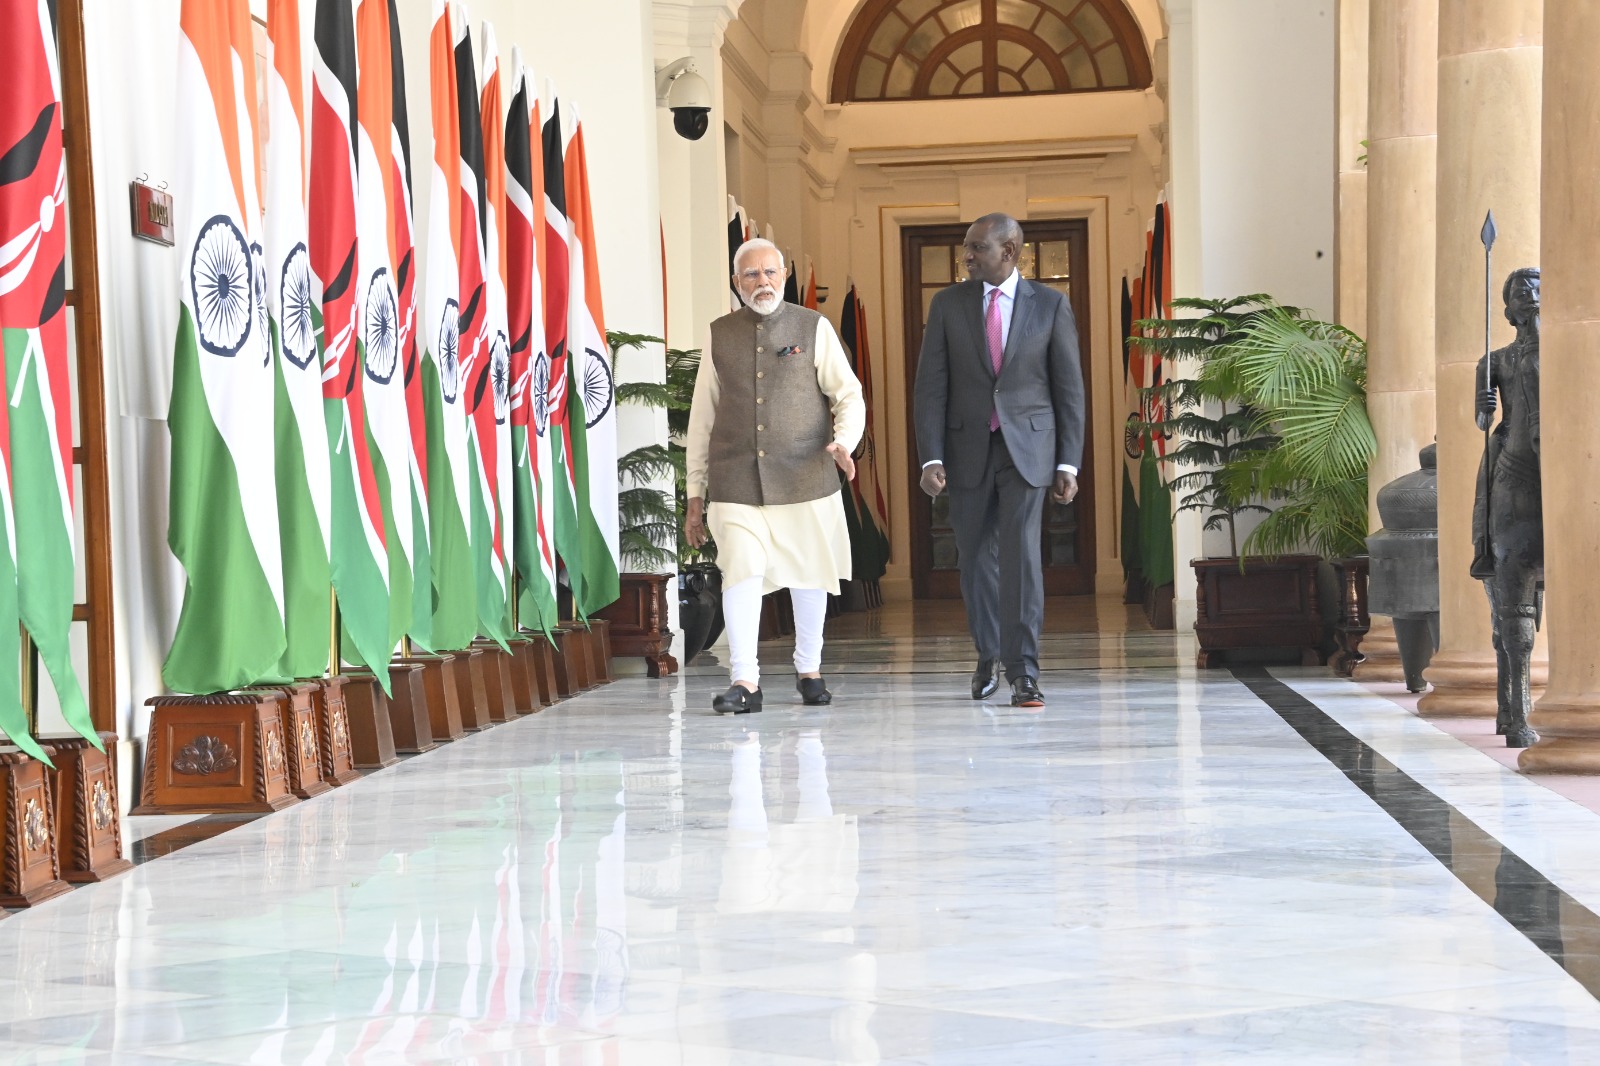 President William Ruto with Indian Prime Prime Minister Narendra Modi | Kenya's agricultural productivity